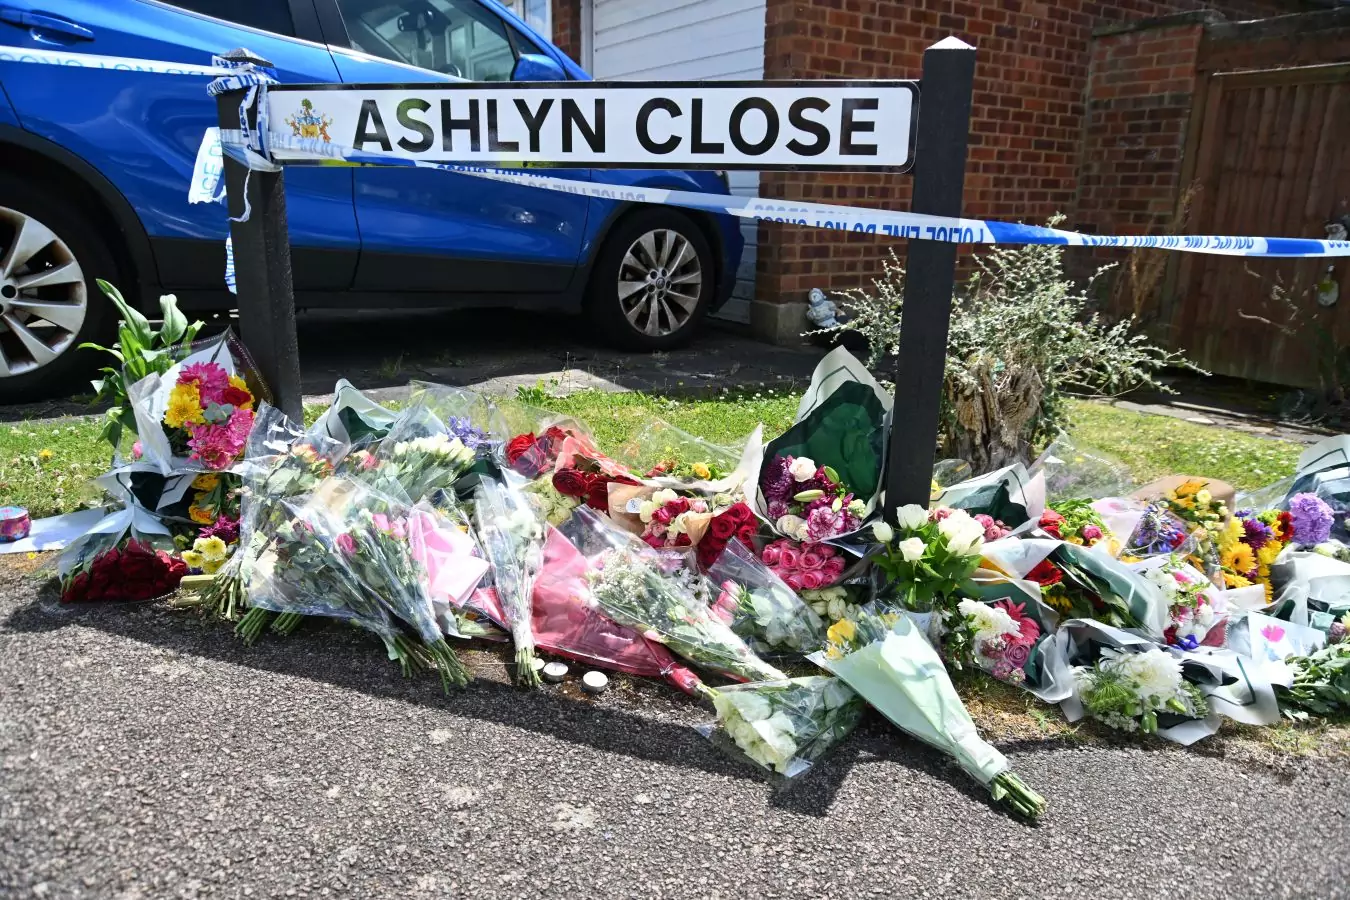 Flowers and Tributes were laid for the victims Carol Hunt, 61, the wife of the BBC horse racing commentator John Hunt, and two of their daughters Hannah Hunt, 28, and Louise Hunt, 25, all tragically died at the scene.